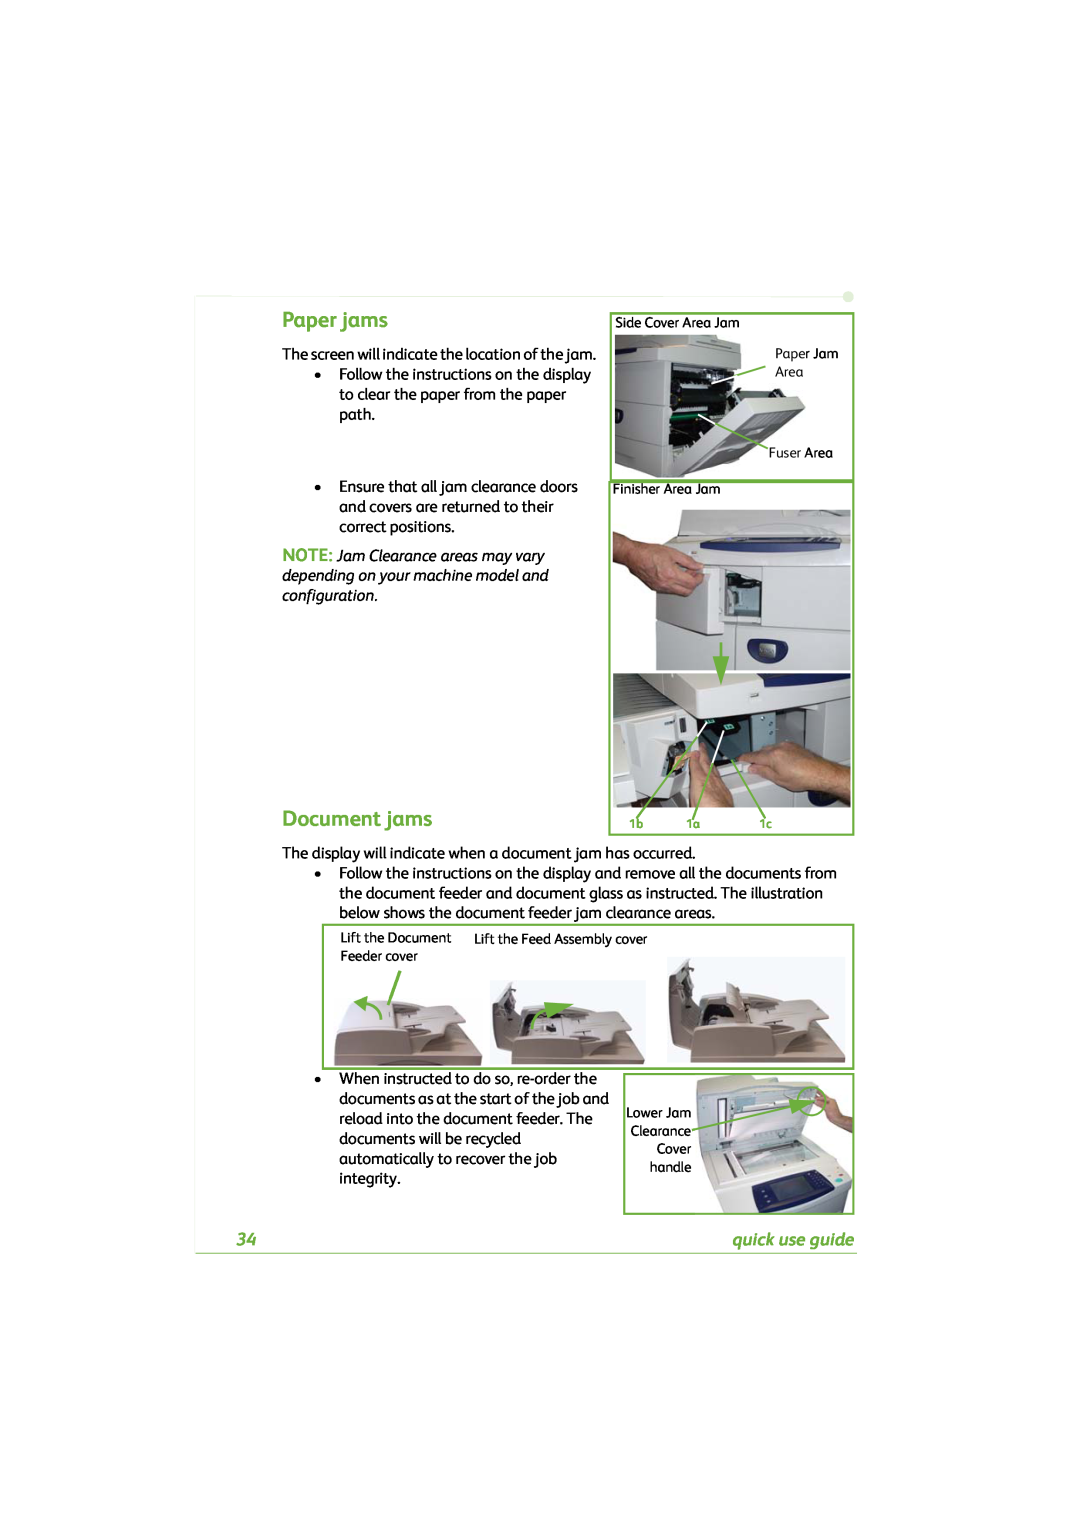 Xerox 4260C manual Paper jams, Document jams, quick use guide 